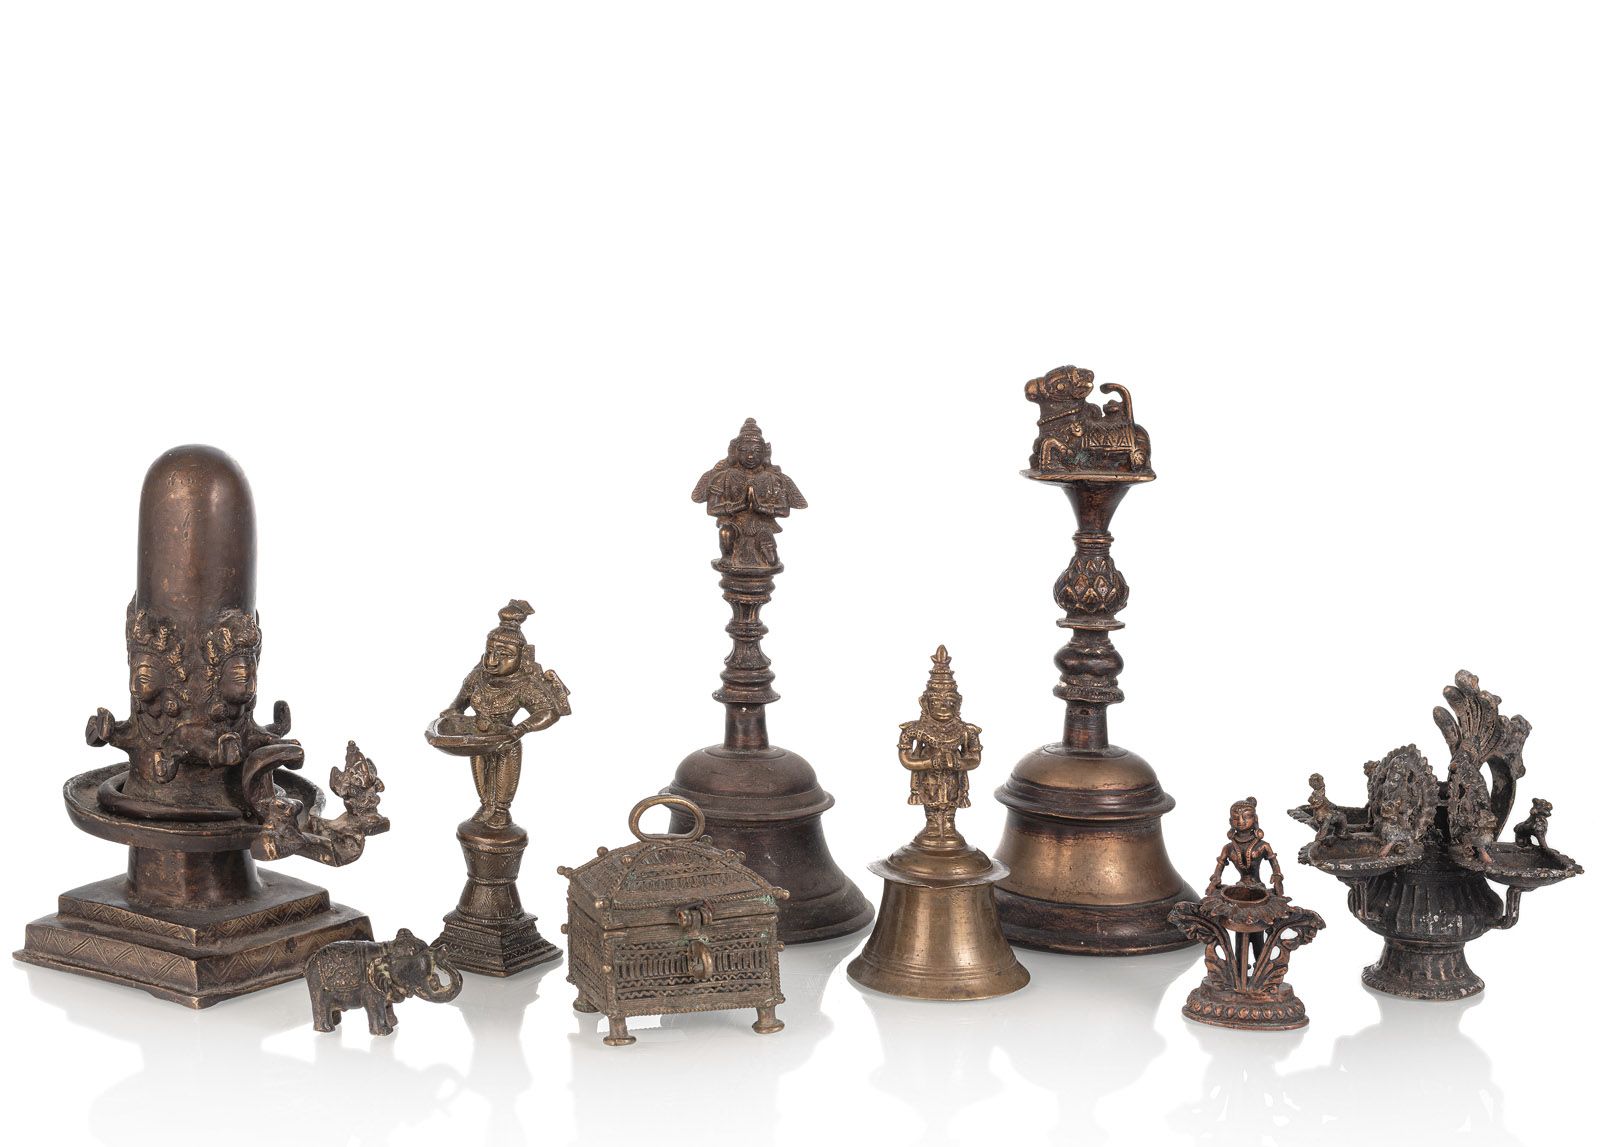 <b>A GROUP OF NINE BRONZE OBJECTS AMONG OTHERS A BRONZE BELLS, FIGURES, A HINGED BOX AND A LINGAM</b>